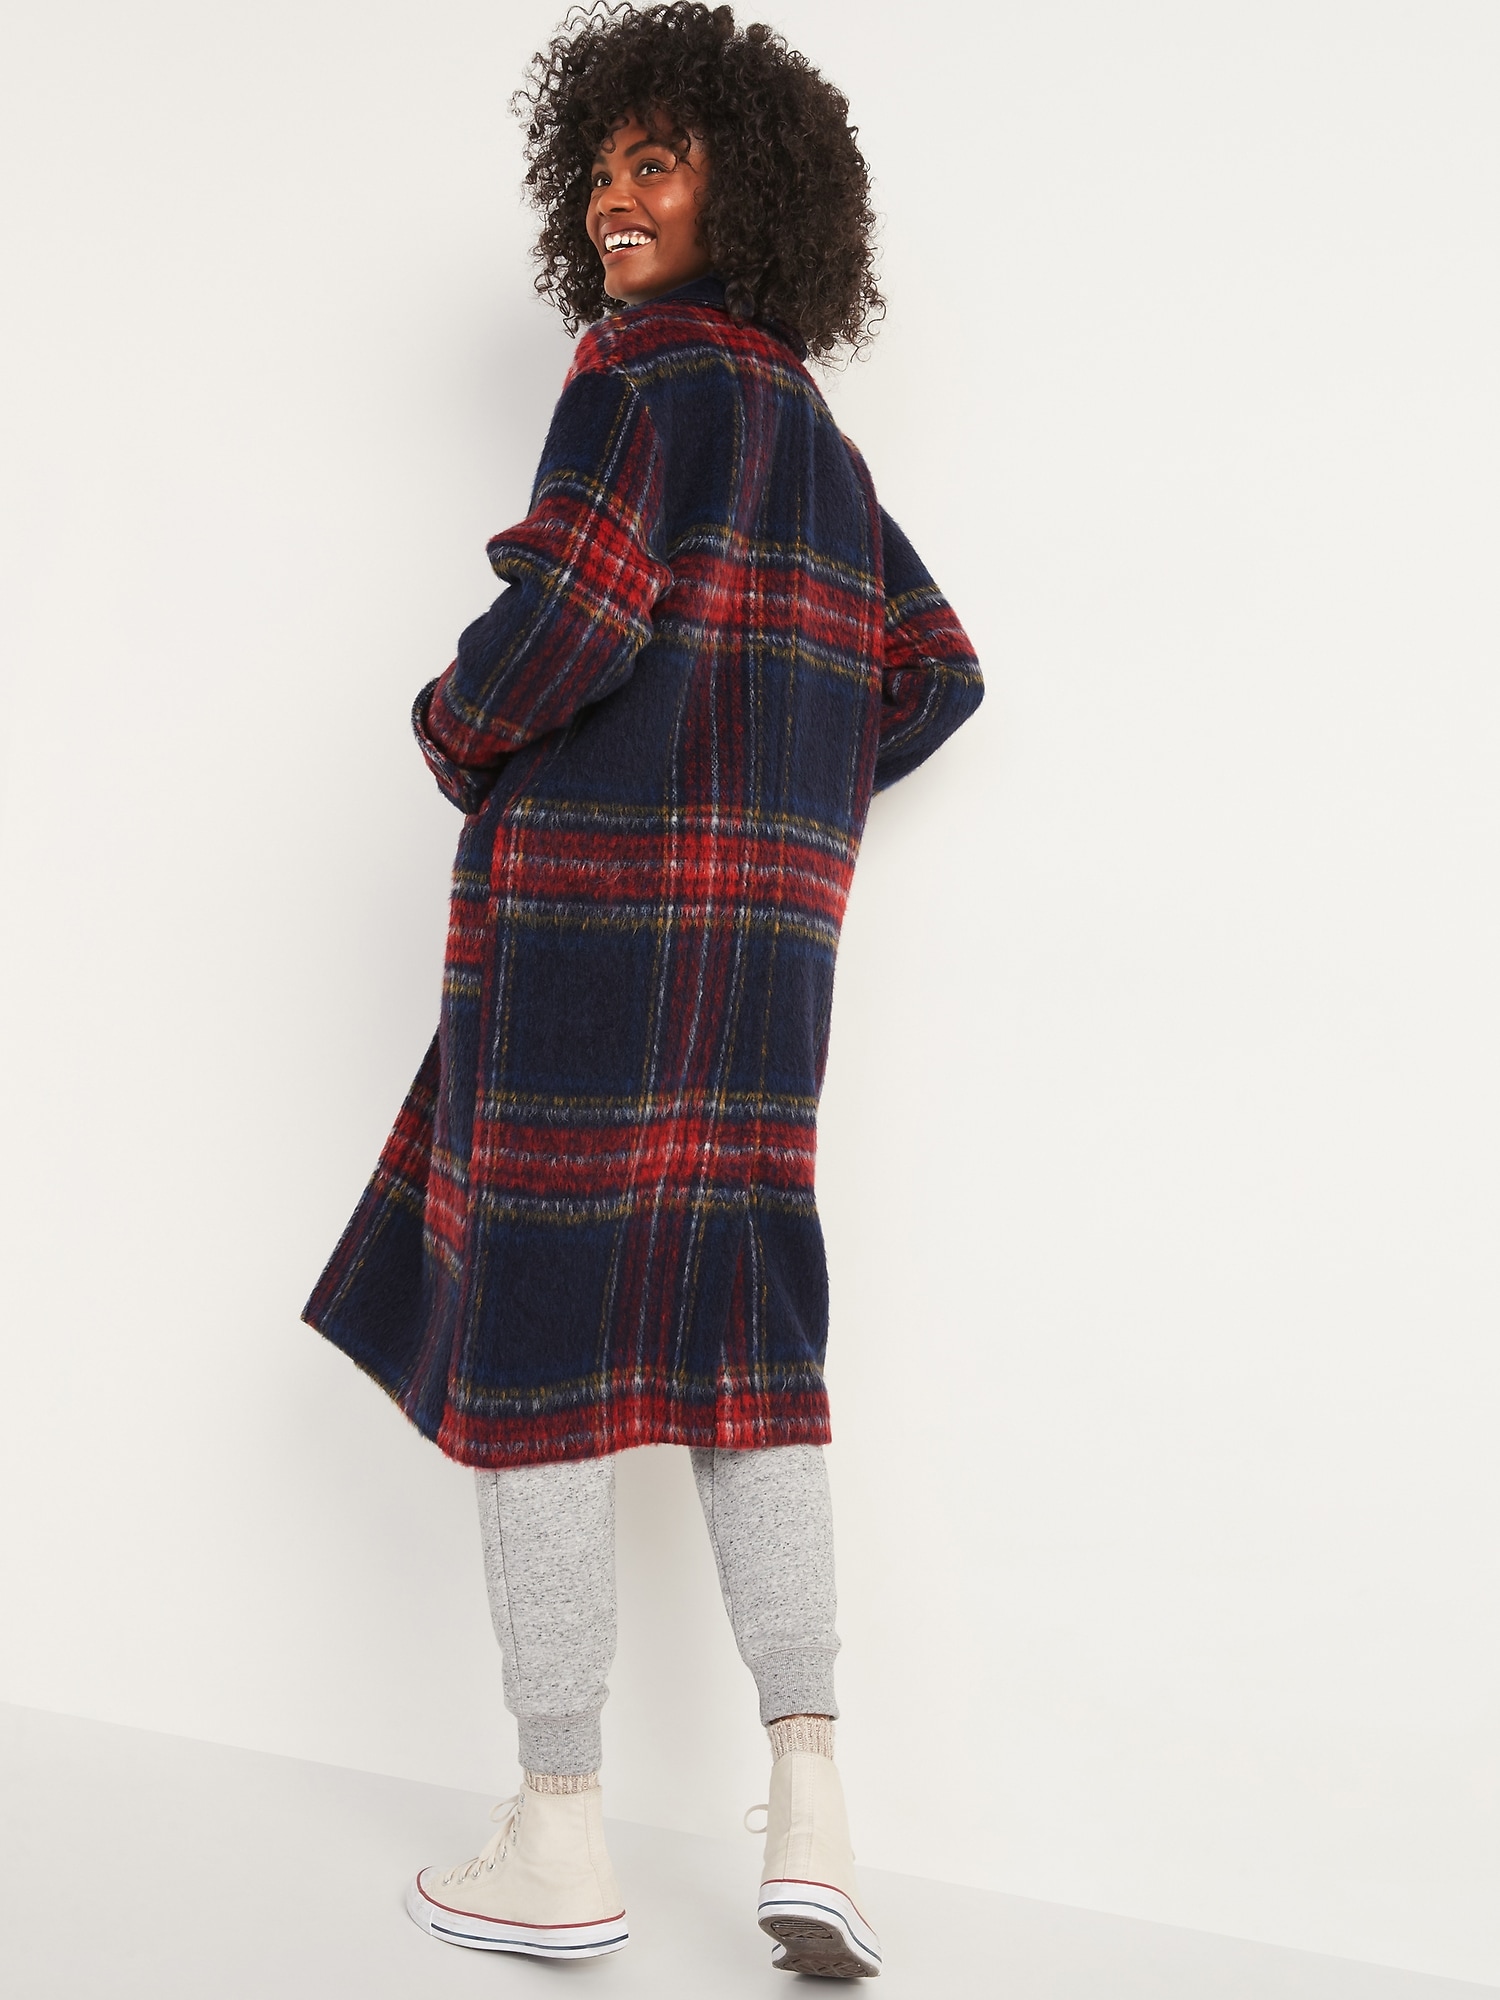 Oversized Soft-Brushed Plaid Button-Front Coat for Women